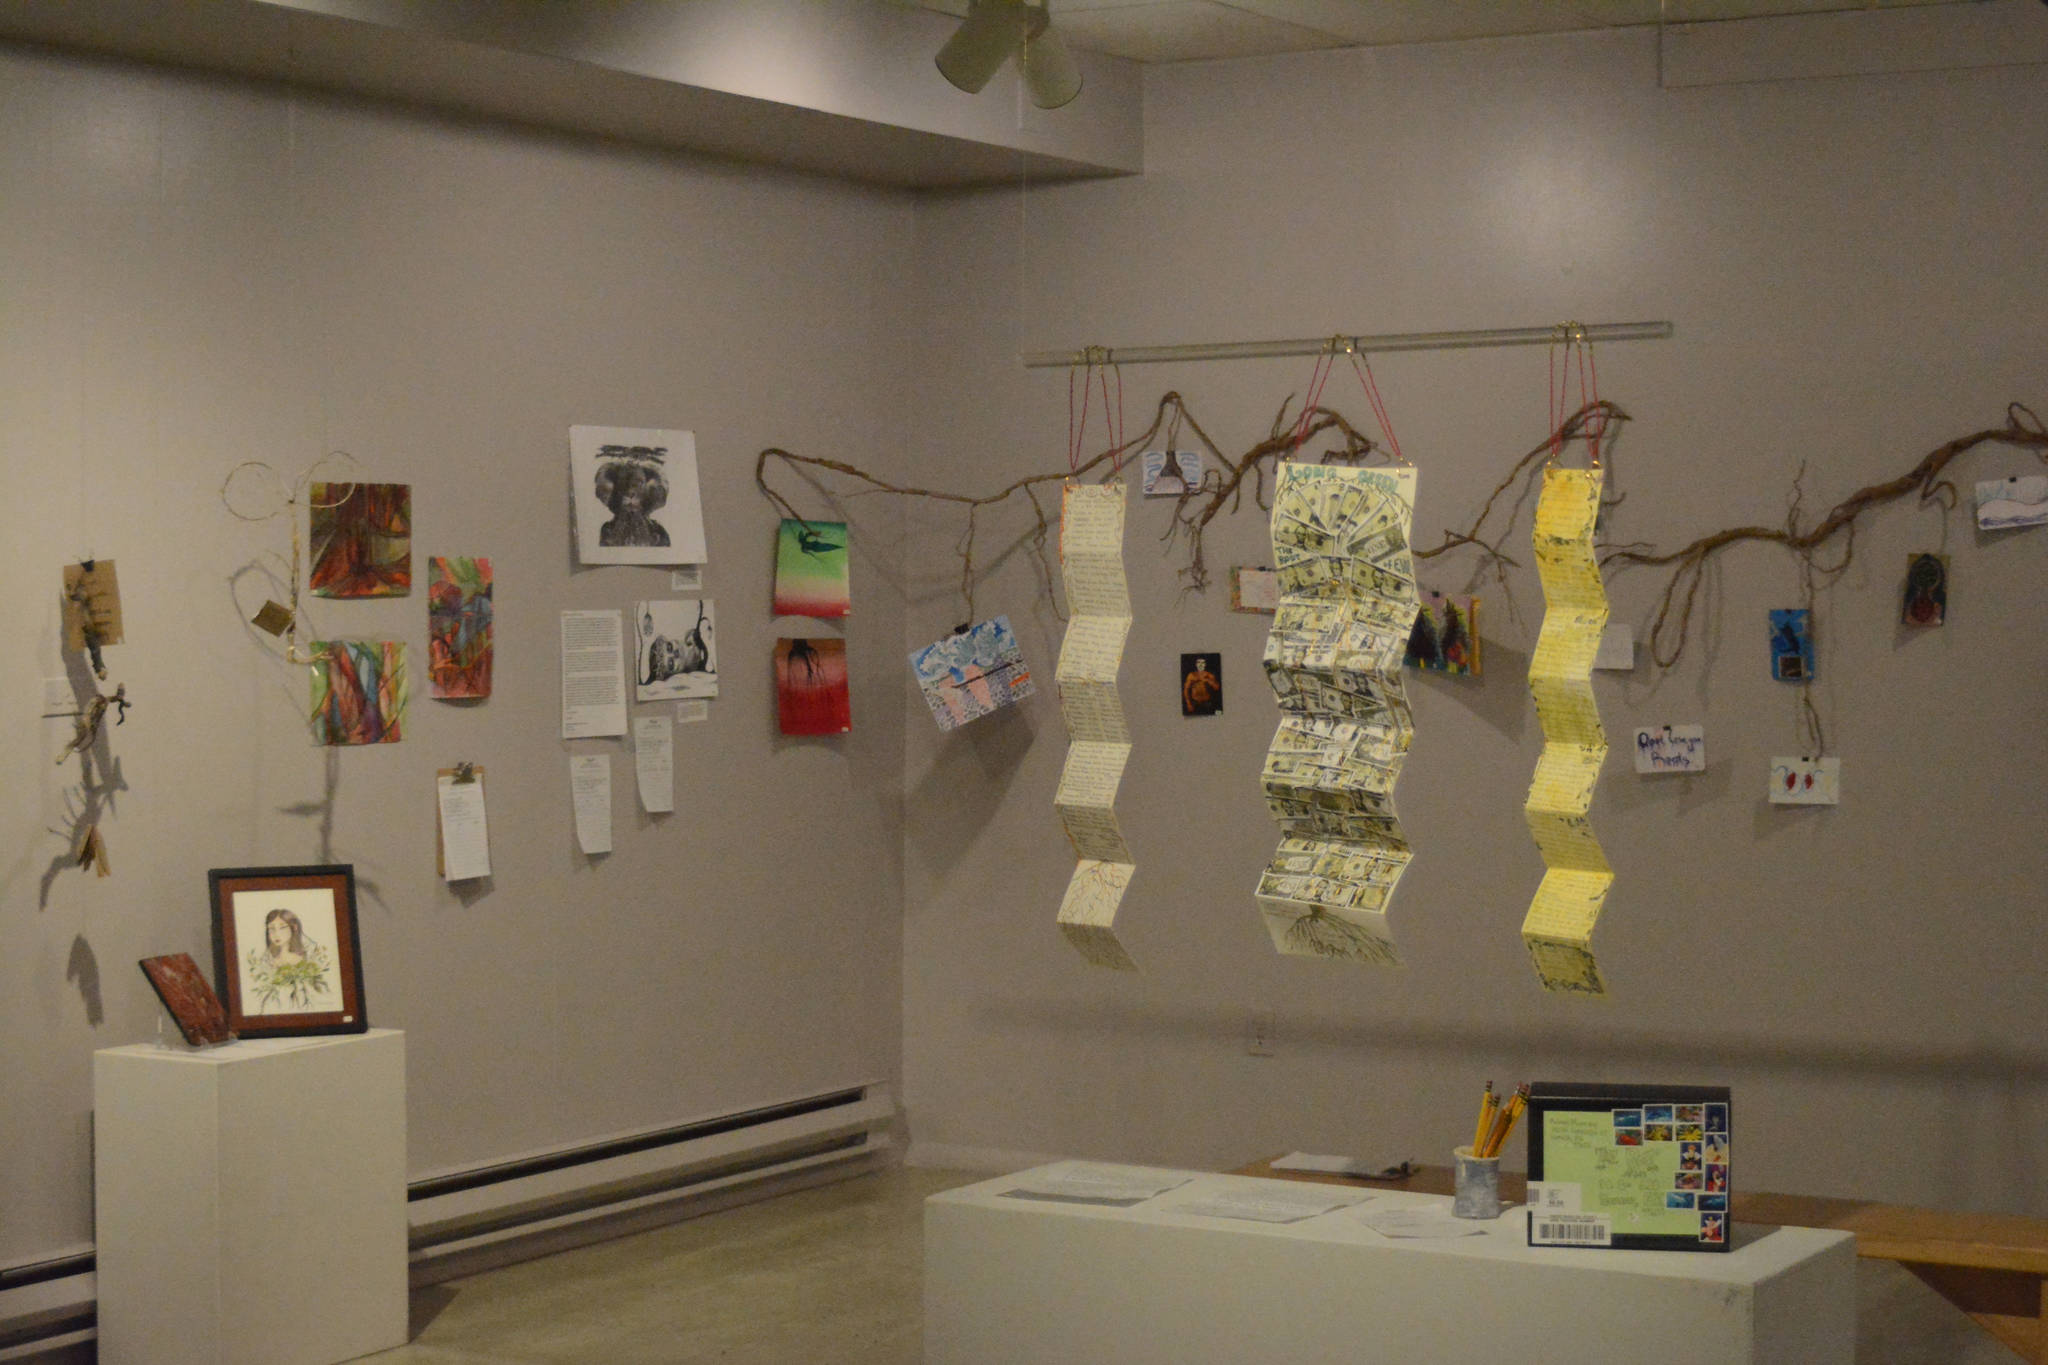 Some of the mail art in the Root show at the Pratt Museum. (Photo by Michael Armstrong, Homer News)